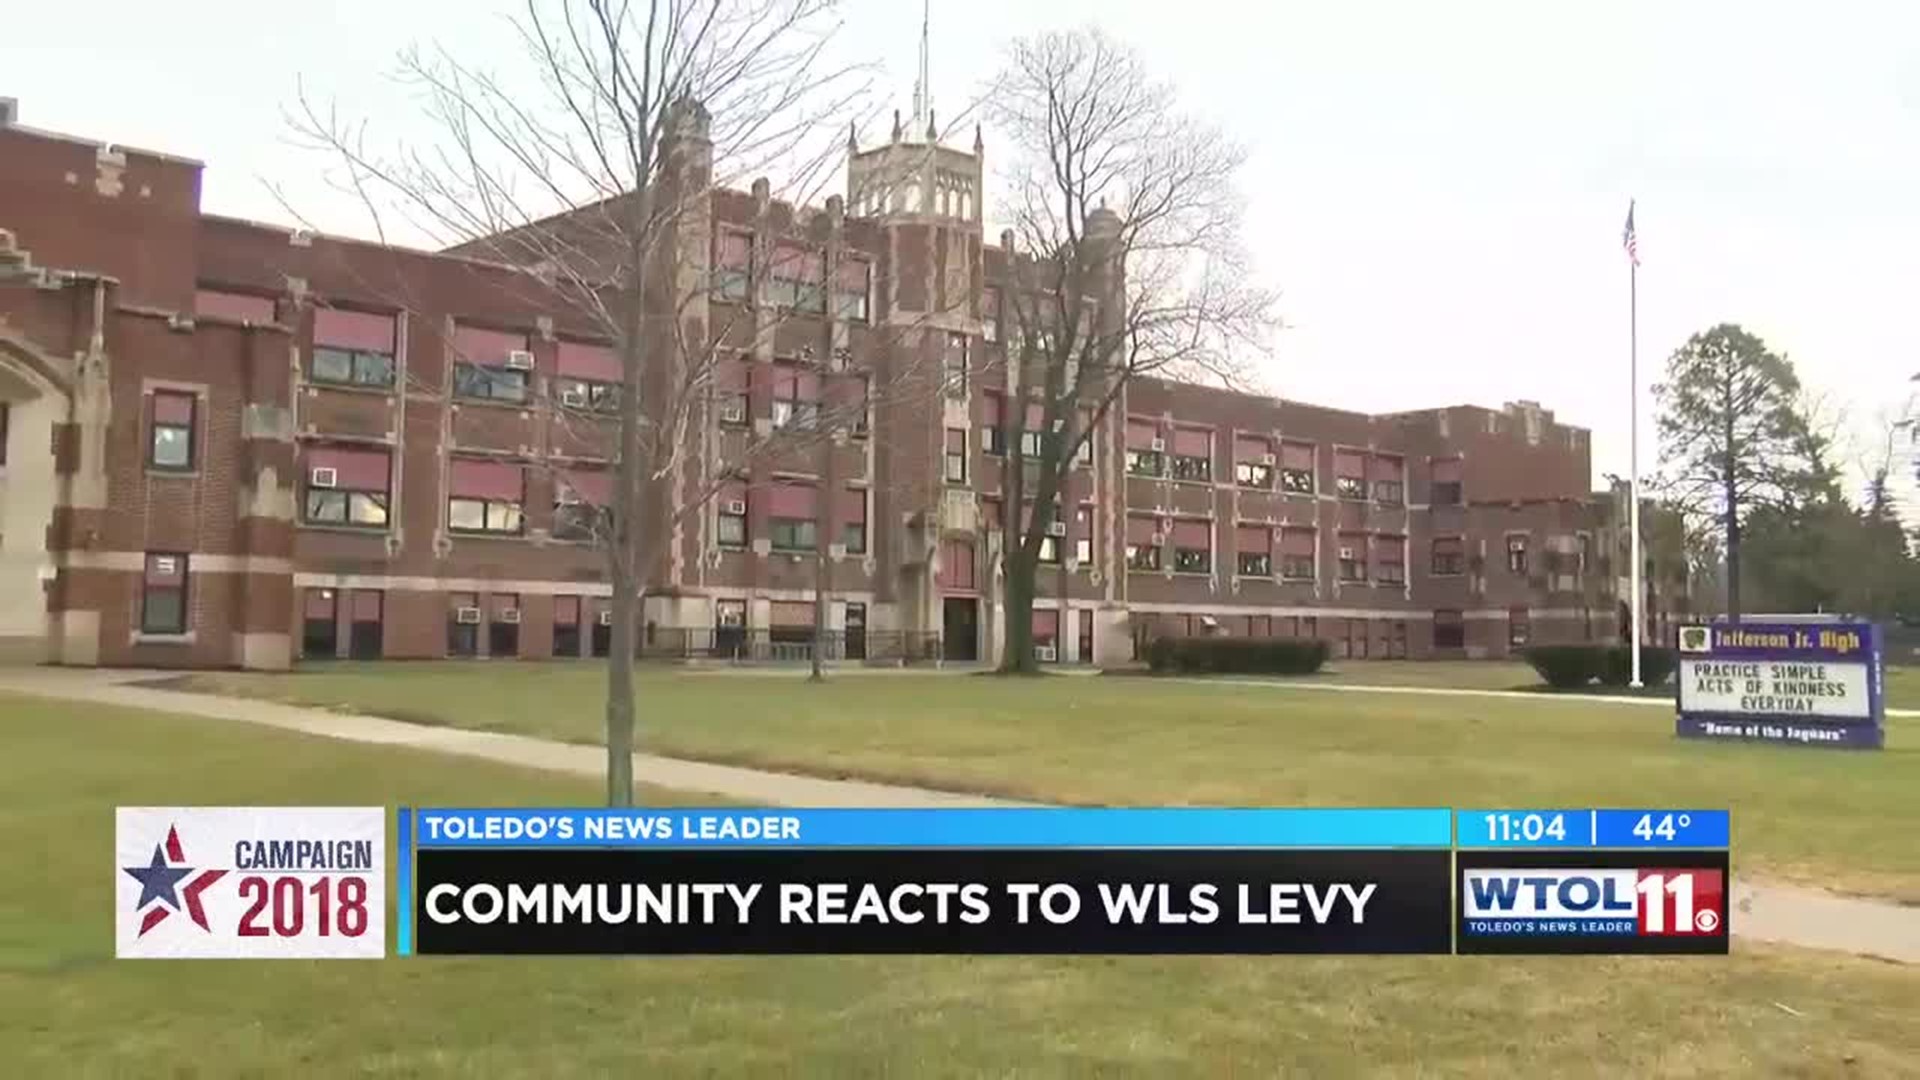 Community reaction to WLS levy